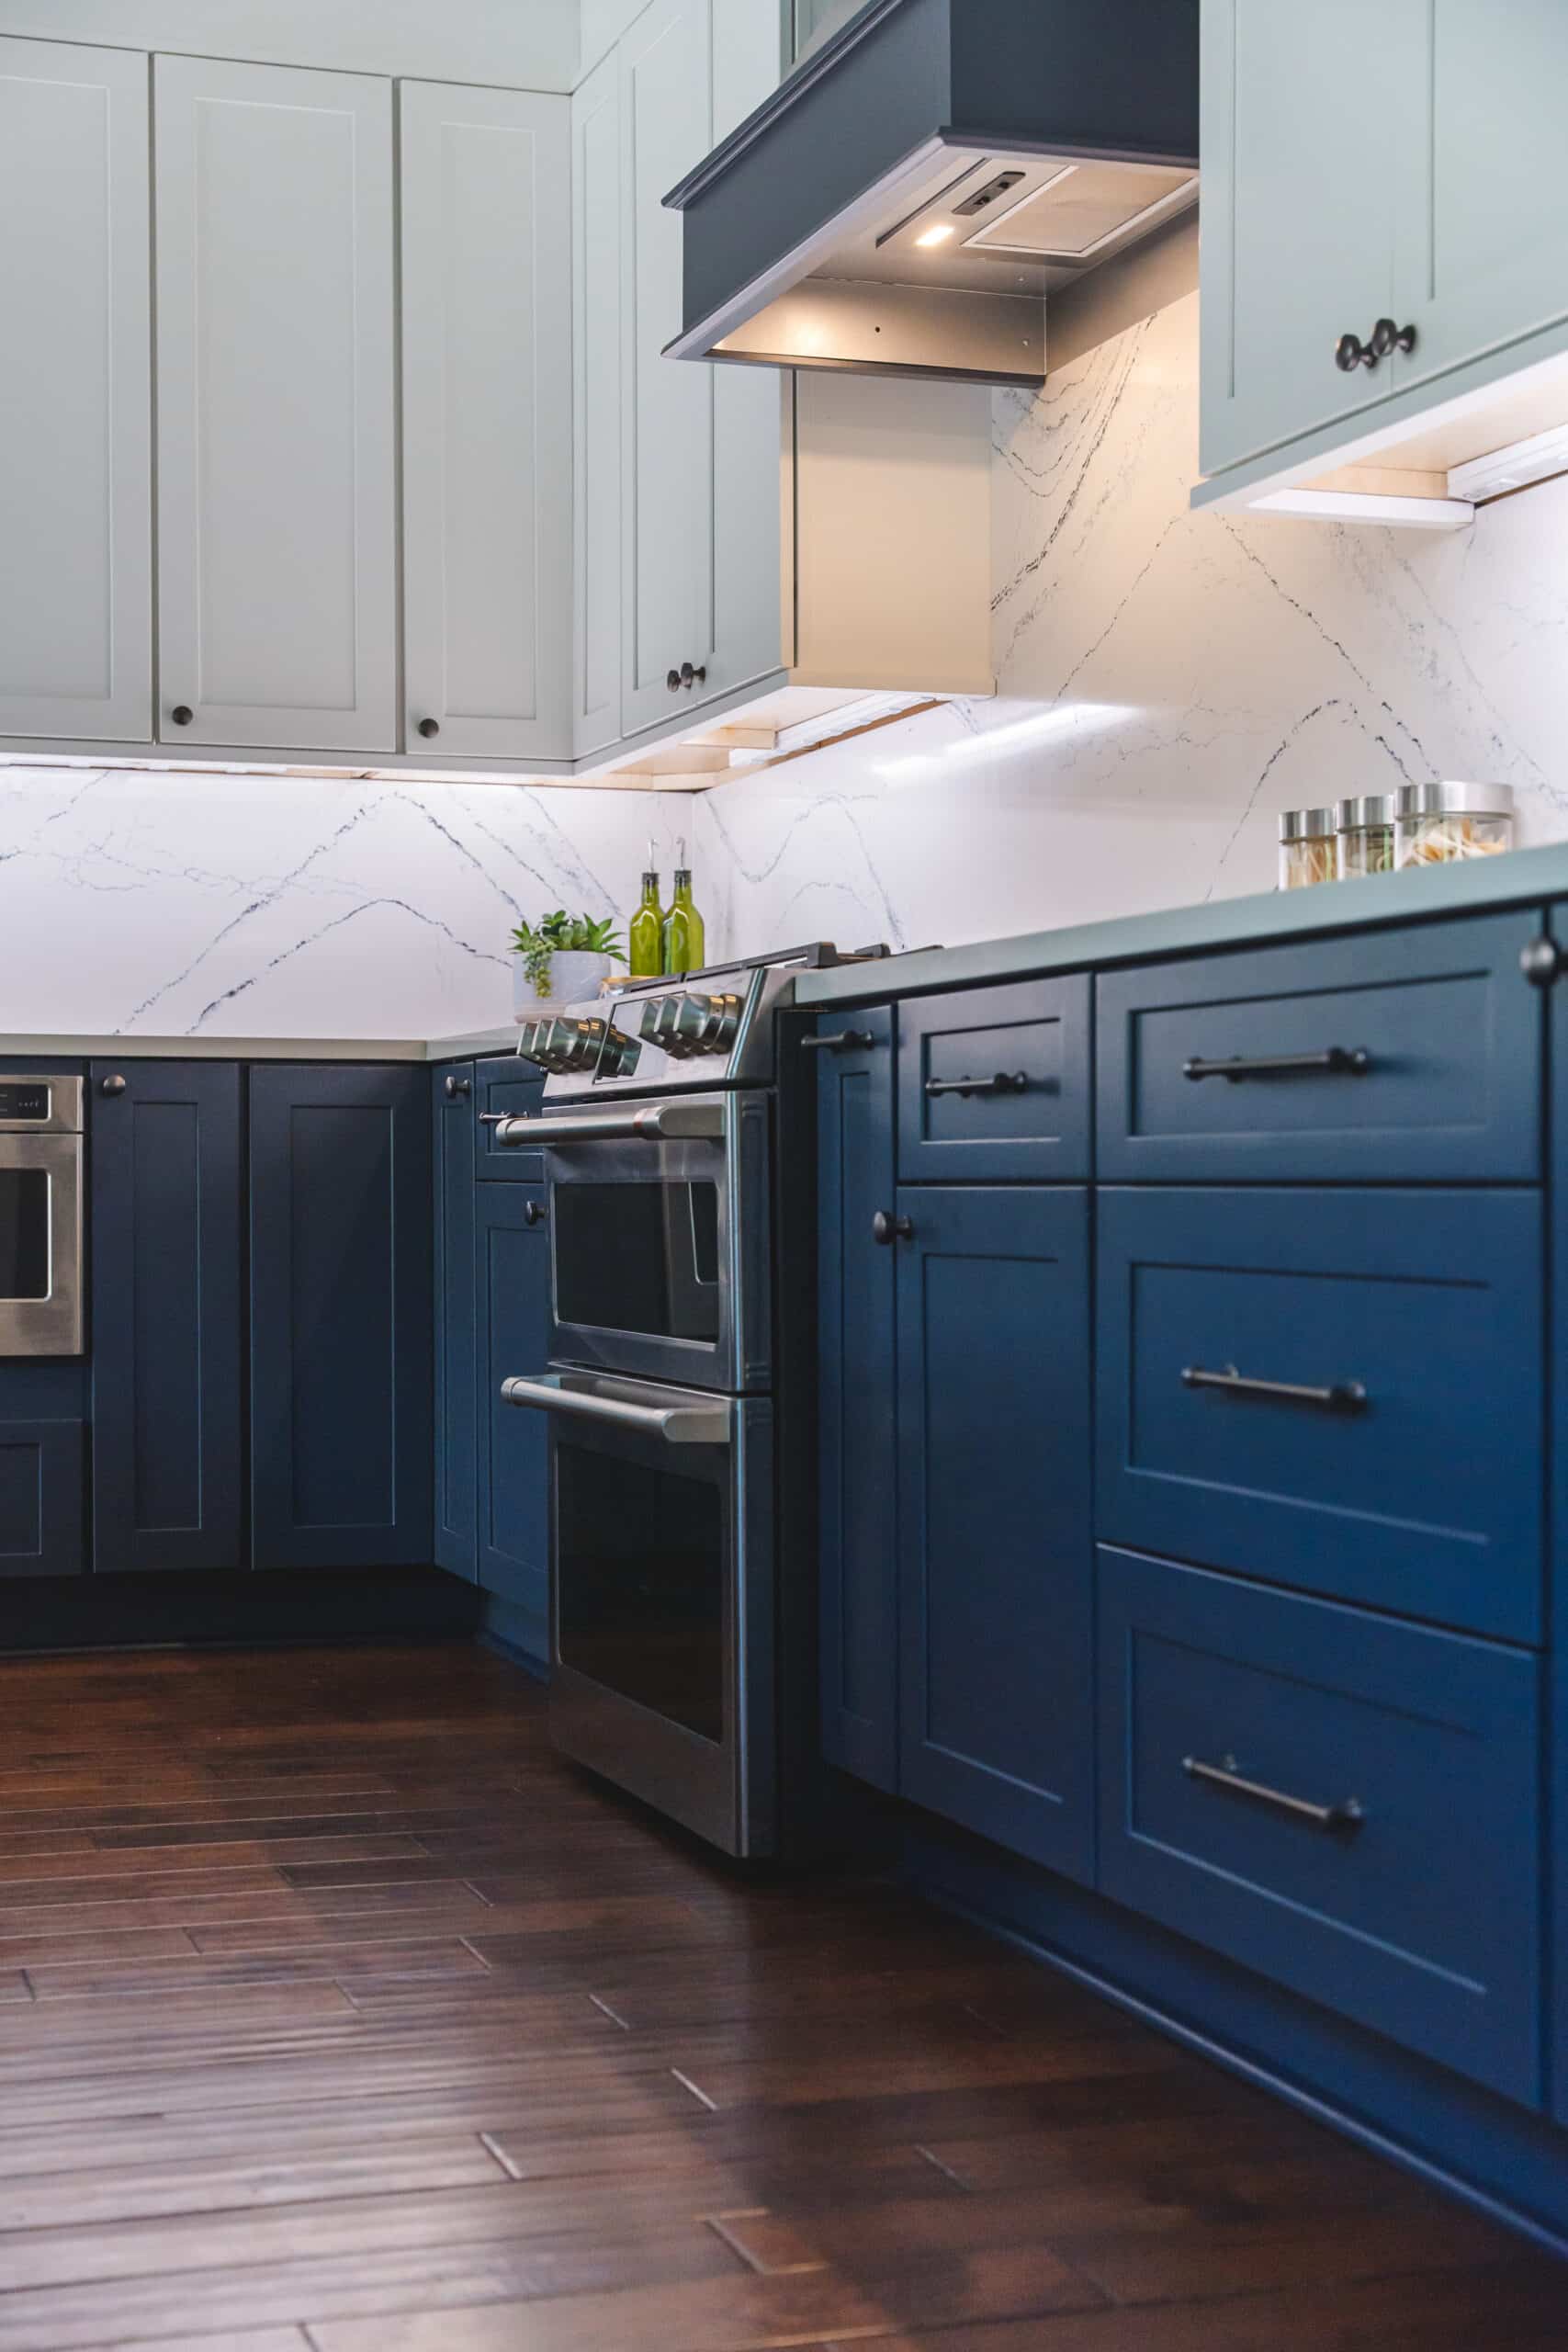 White and blue kitchen cabinets with stove and exhaust